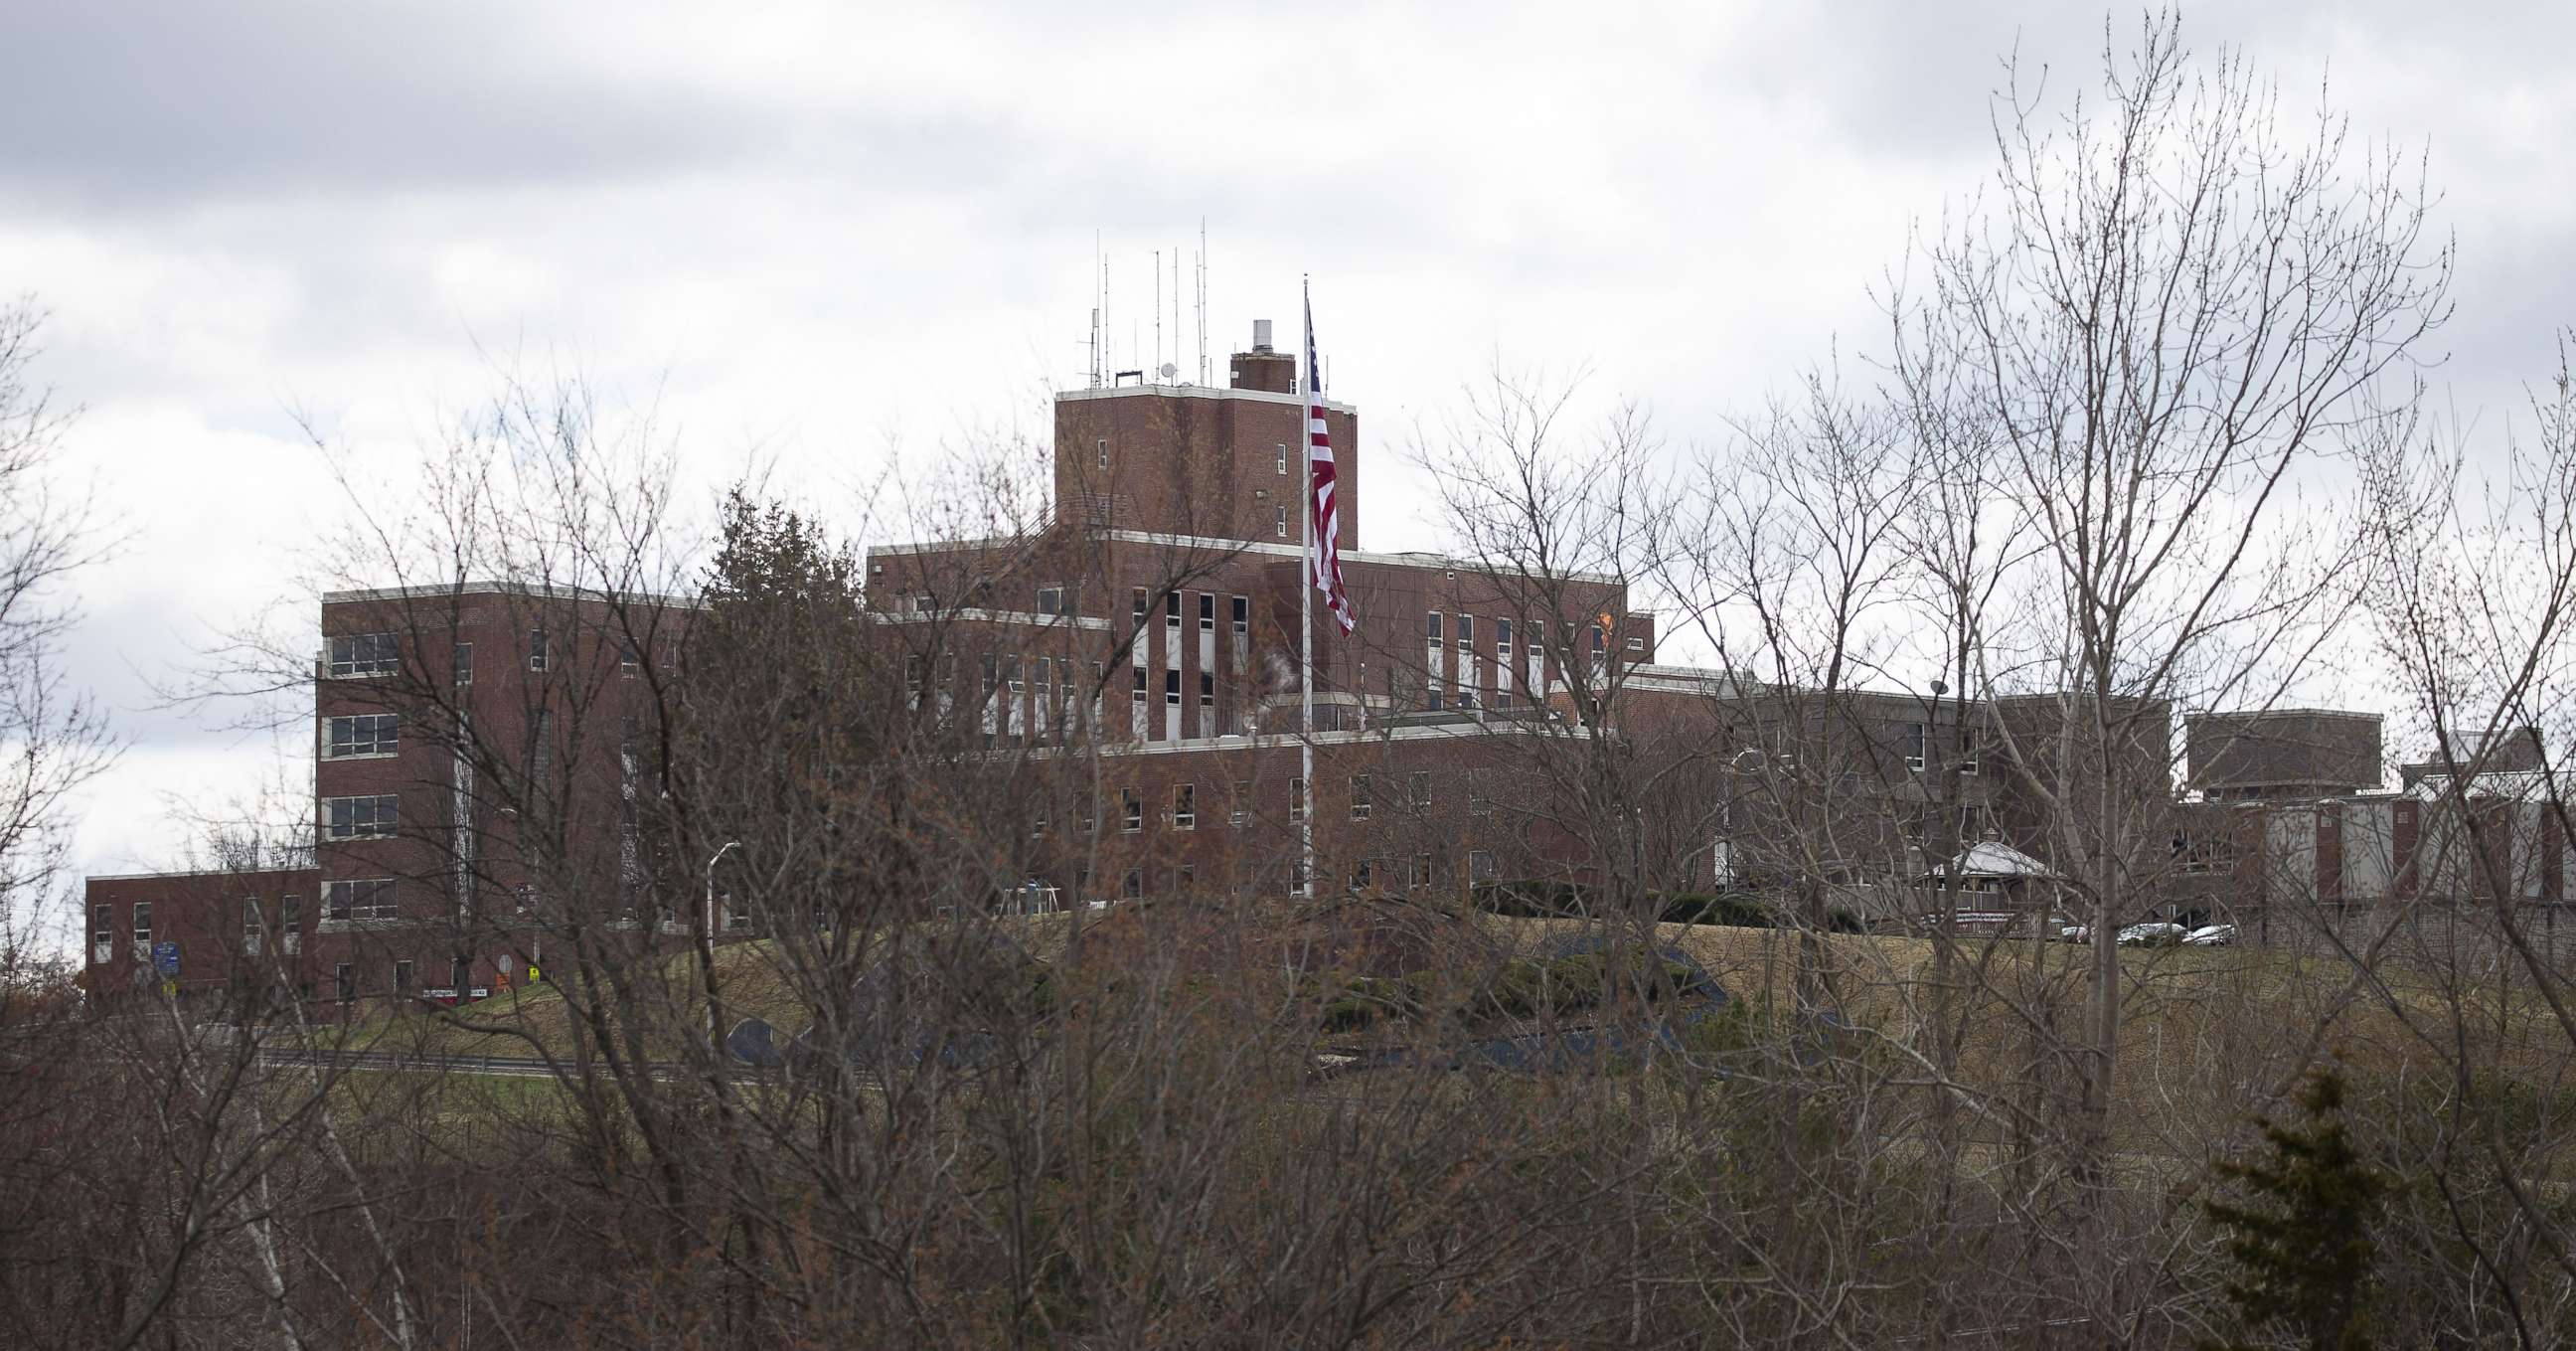 PHOTO: The Soldiers' Home stands atop the hill in Holyoke, Mass., March 31, 2020.